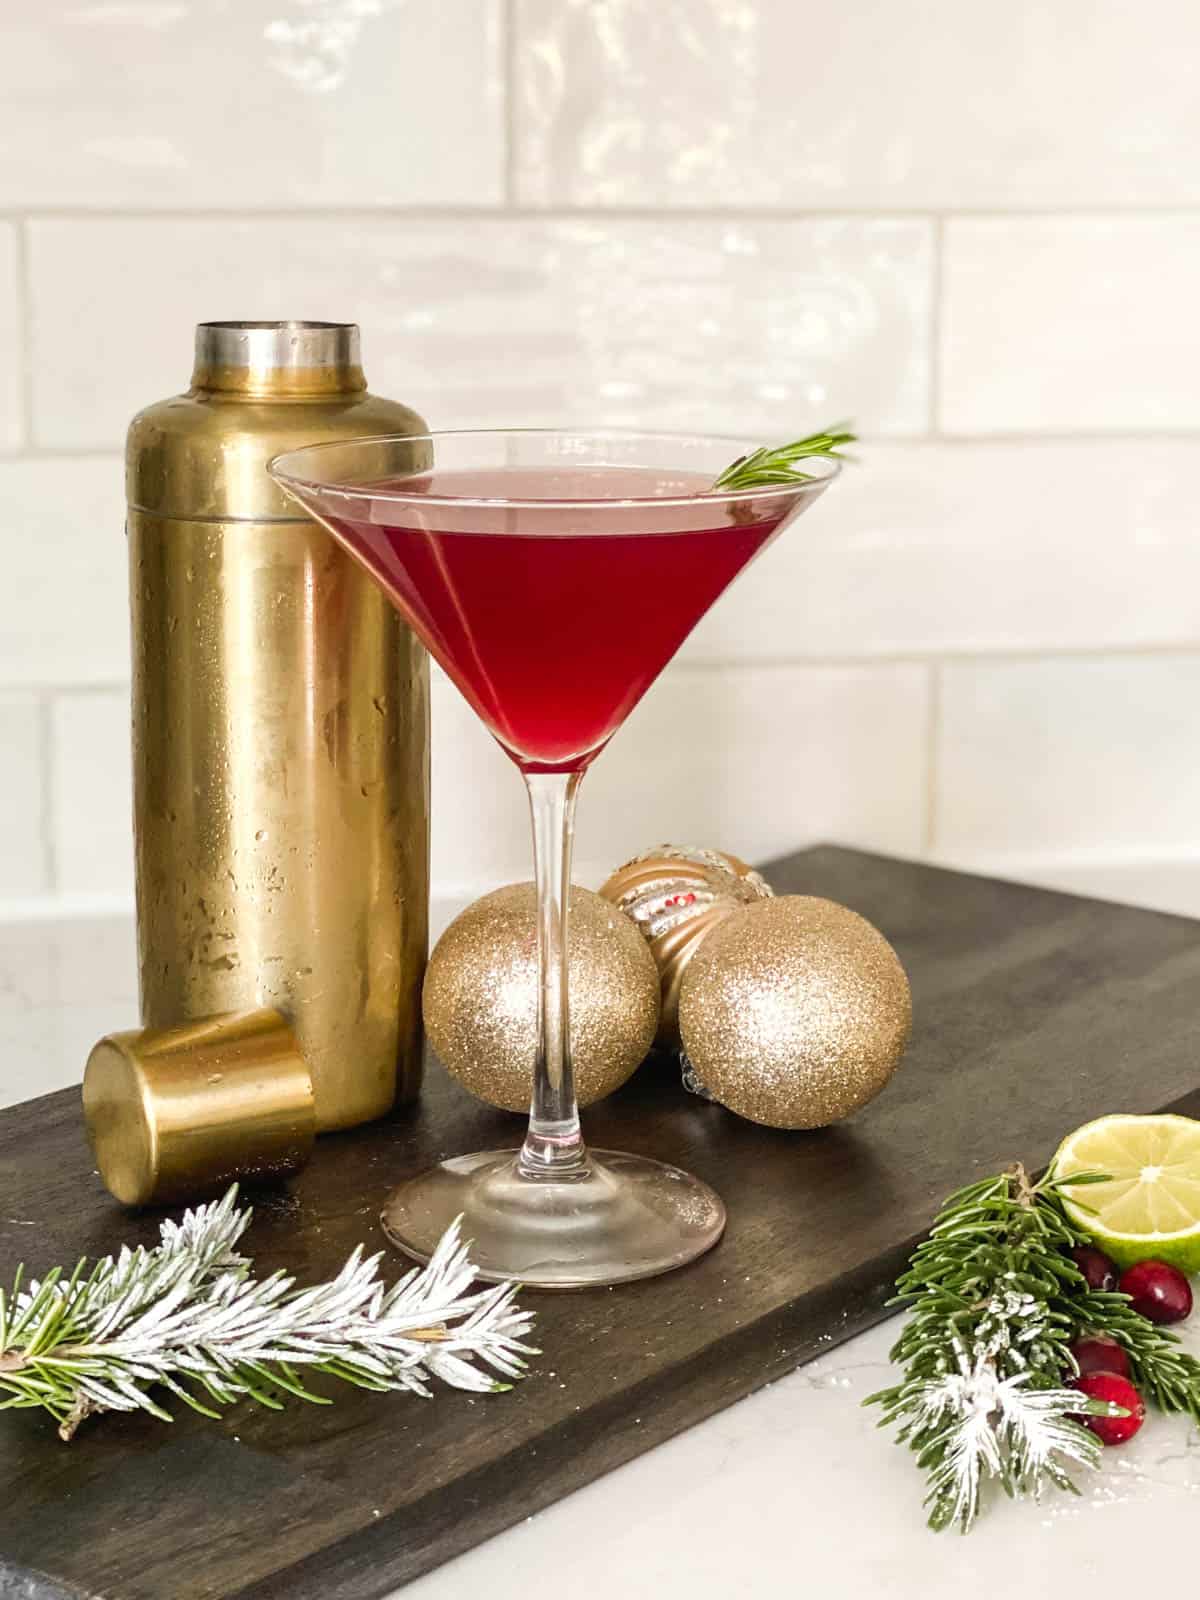 A cosmopolitan for Christmas in a martini glass next to a gold cocktail shaker.